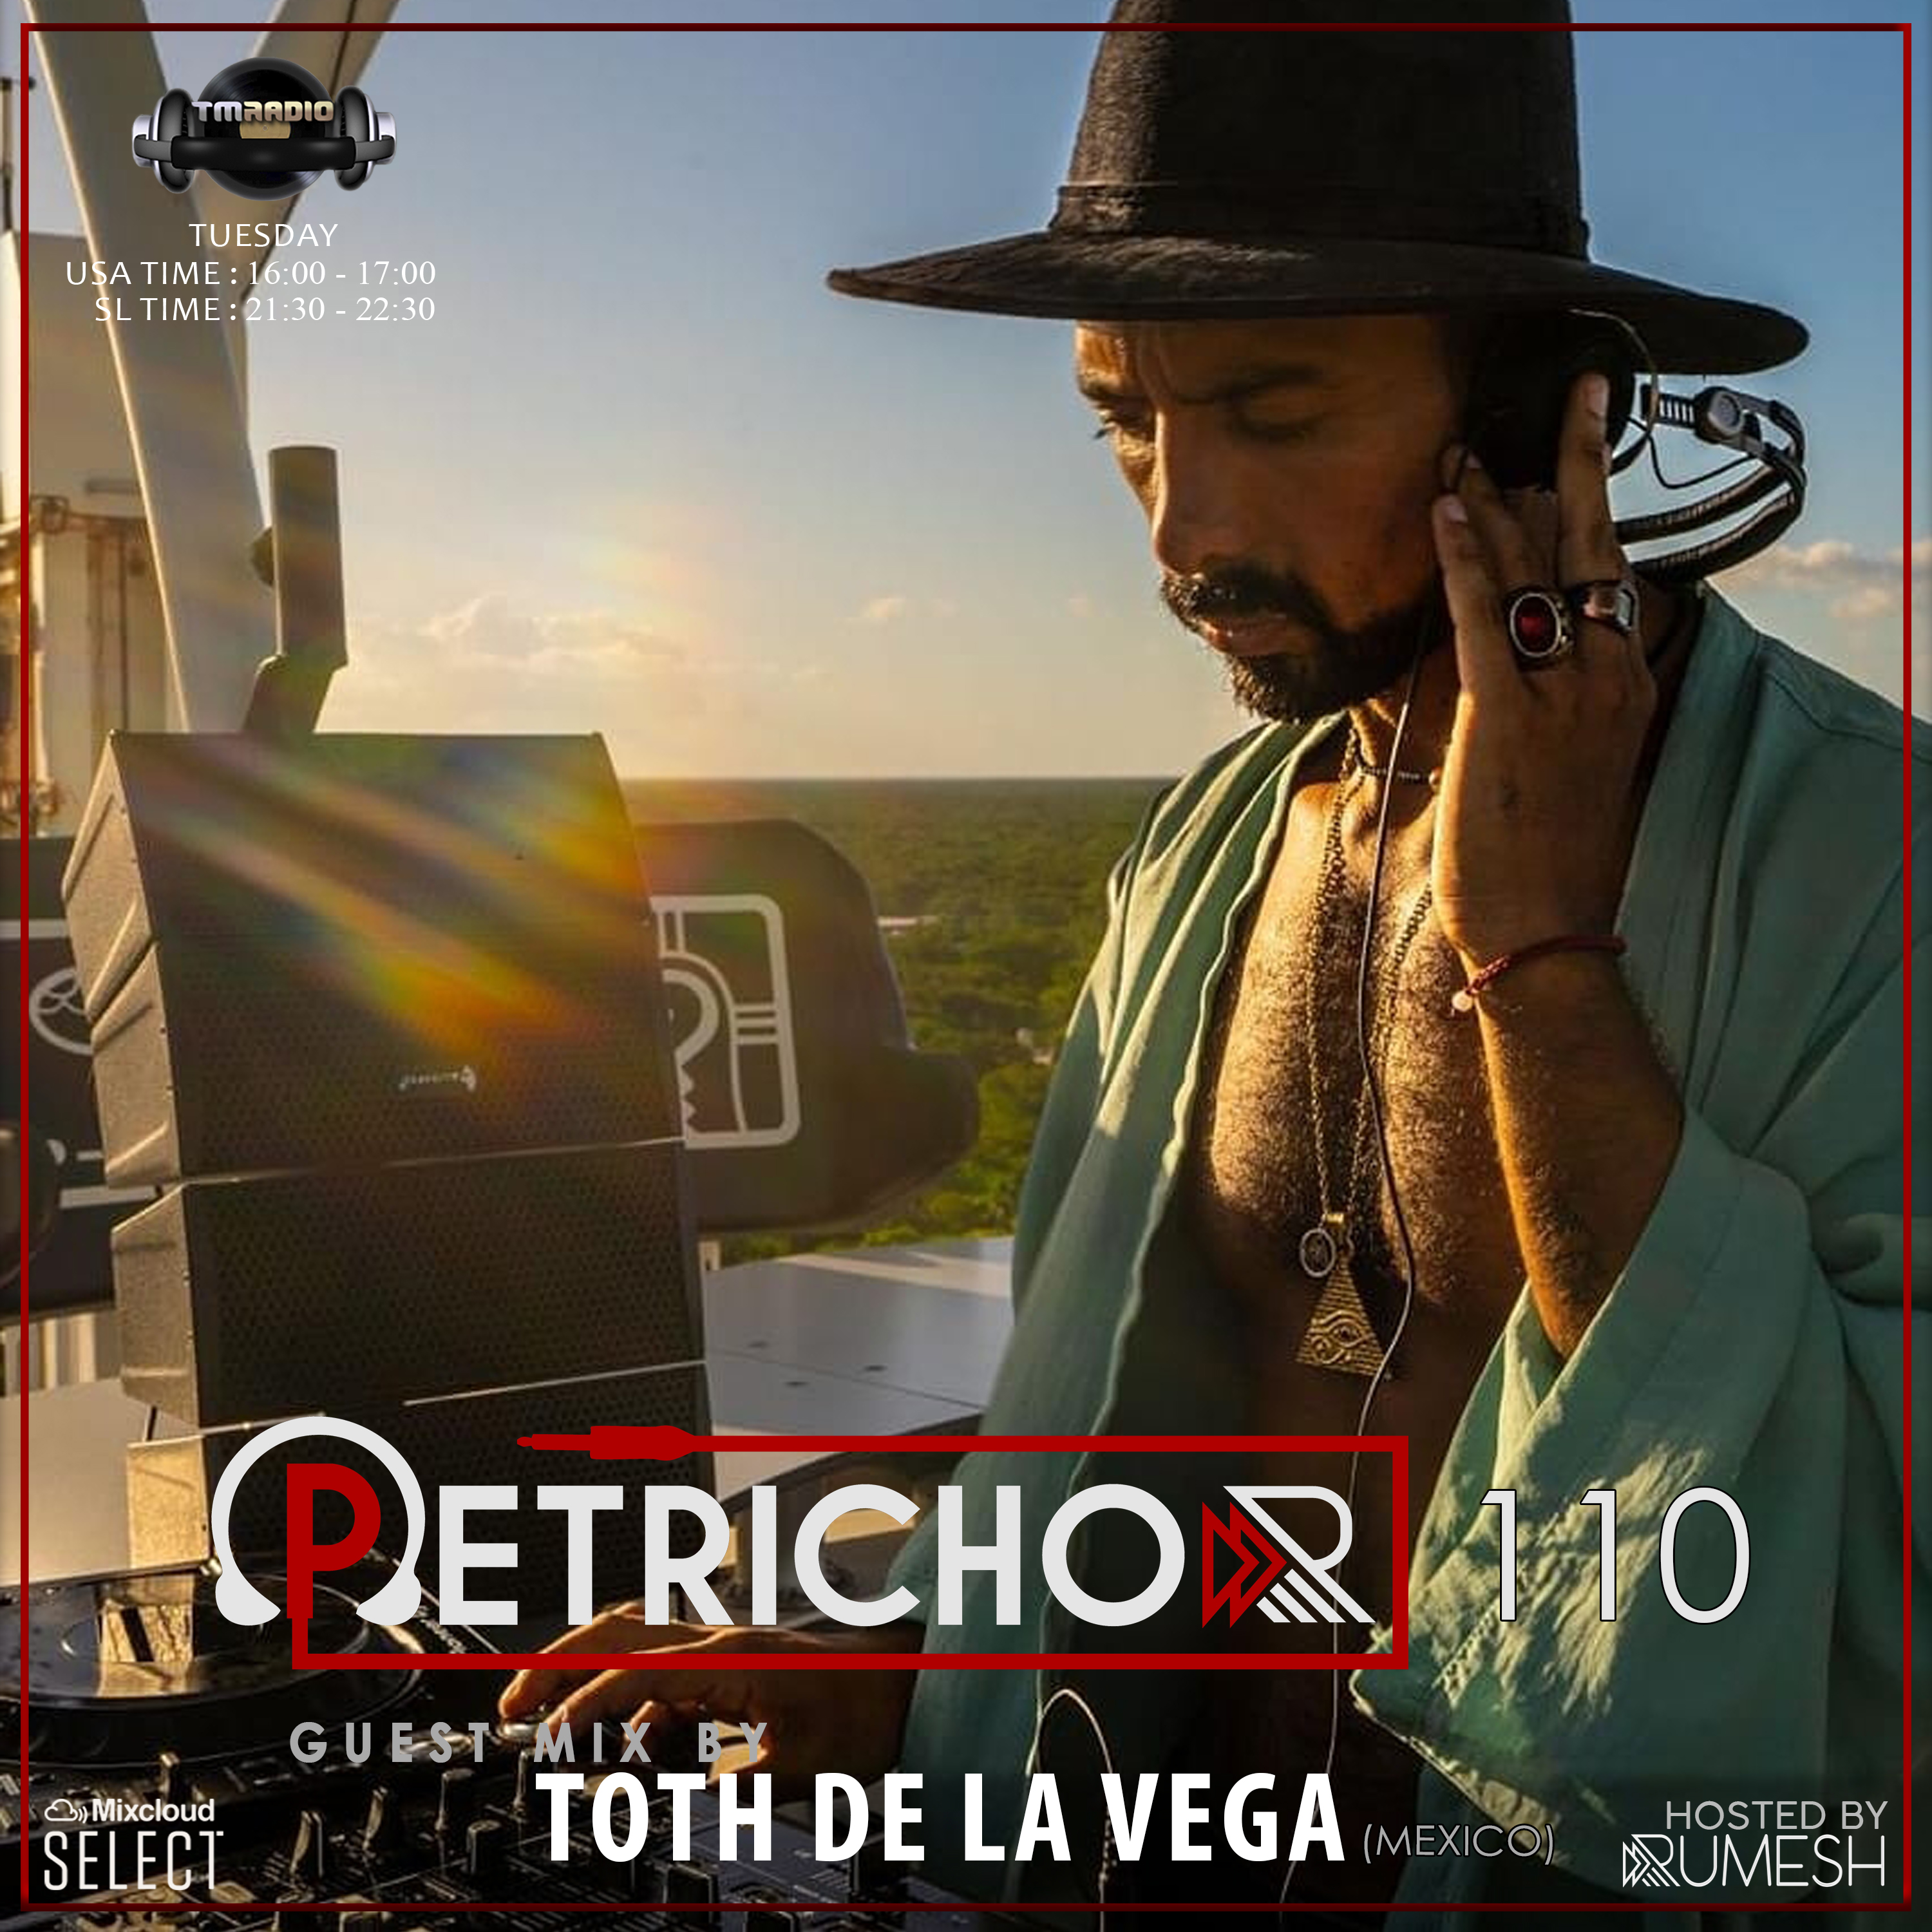 Petrichor 110 Guest Mix by Toth De la Vega -(Mexico) (from August 2nd)